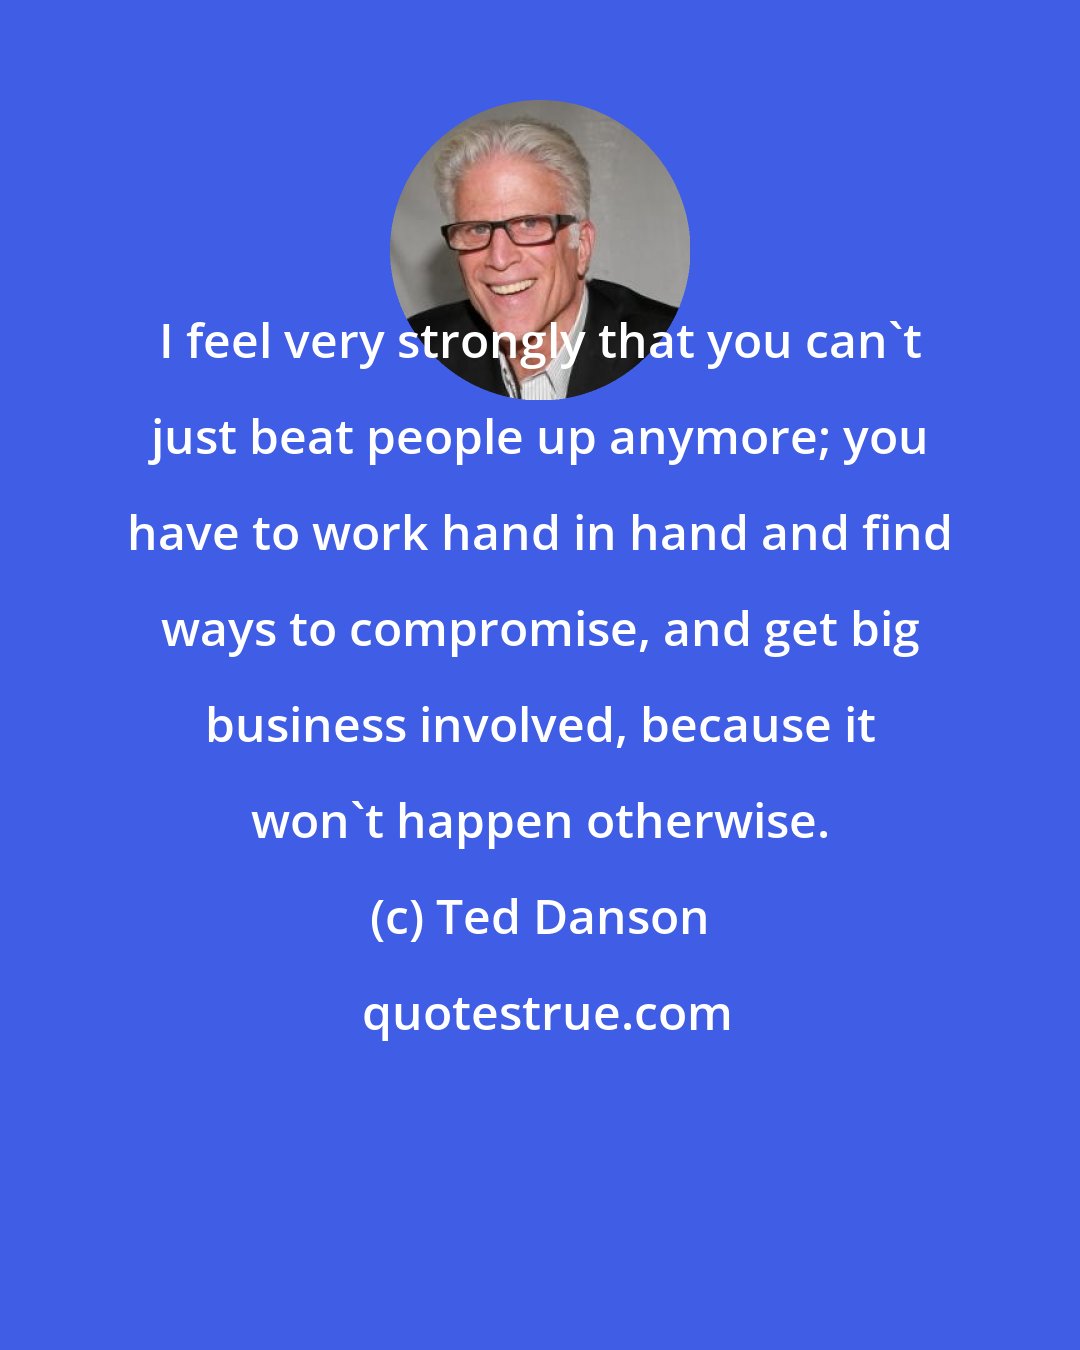 Ted Danson: I feel very strongly that you can't just beat people up anymore; you have to work hand in hand and find ways to compromise, and get big business involved, because it won't happen otherwise.